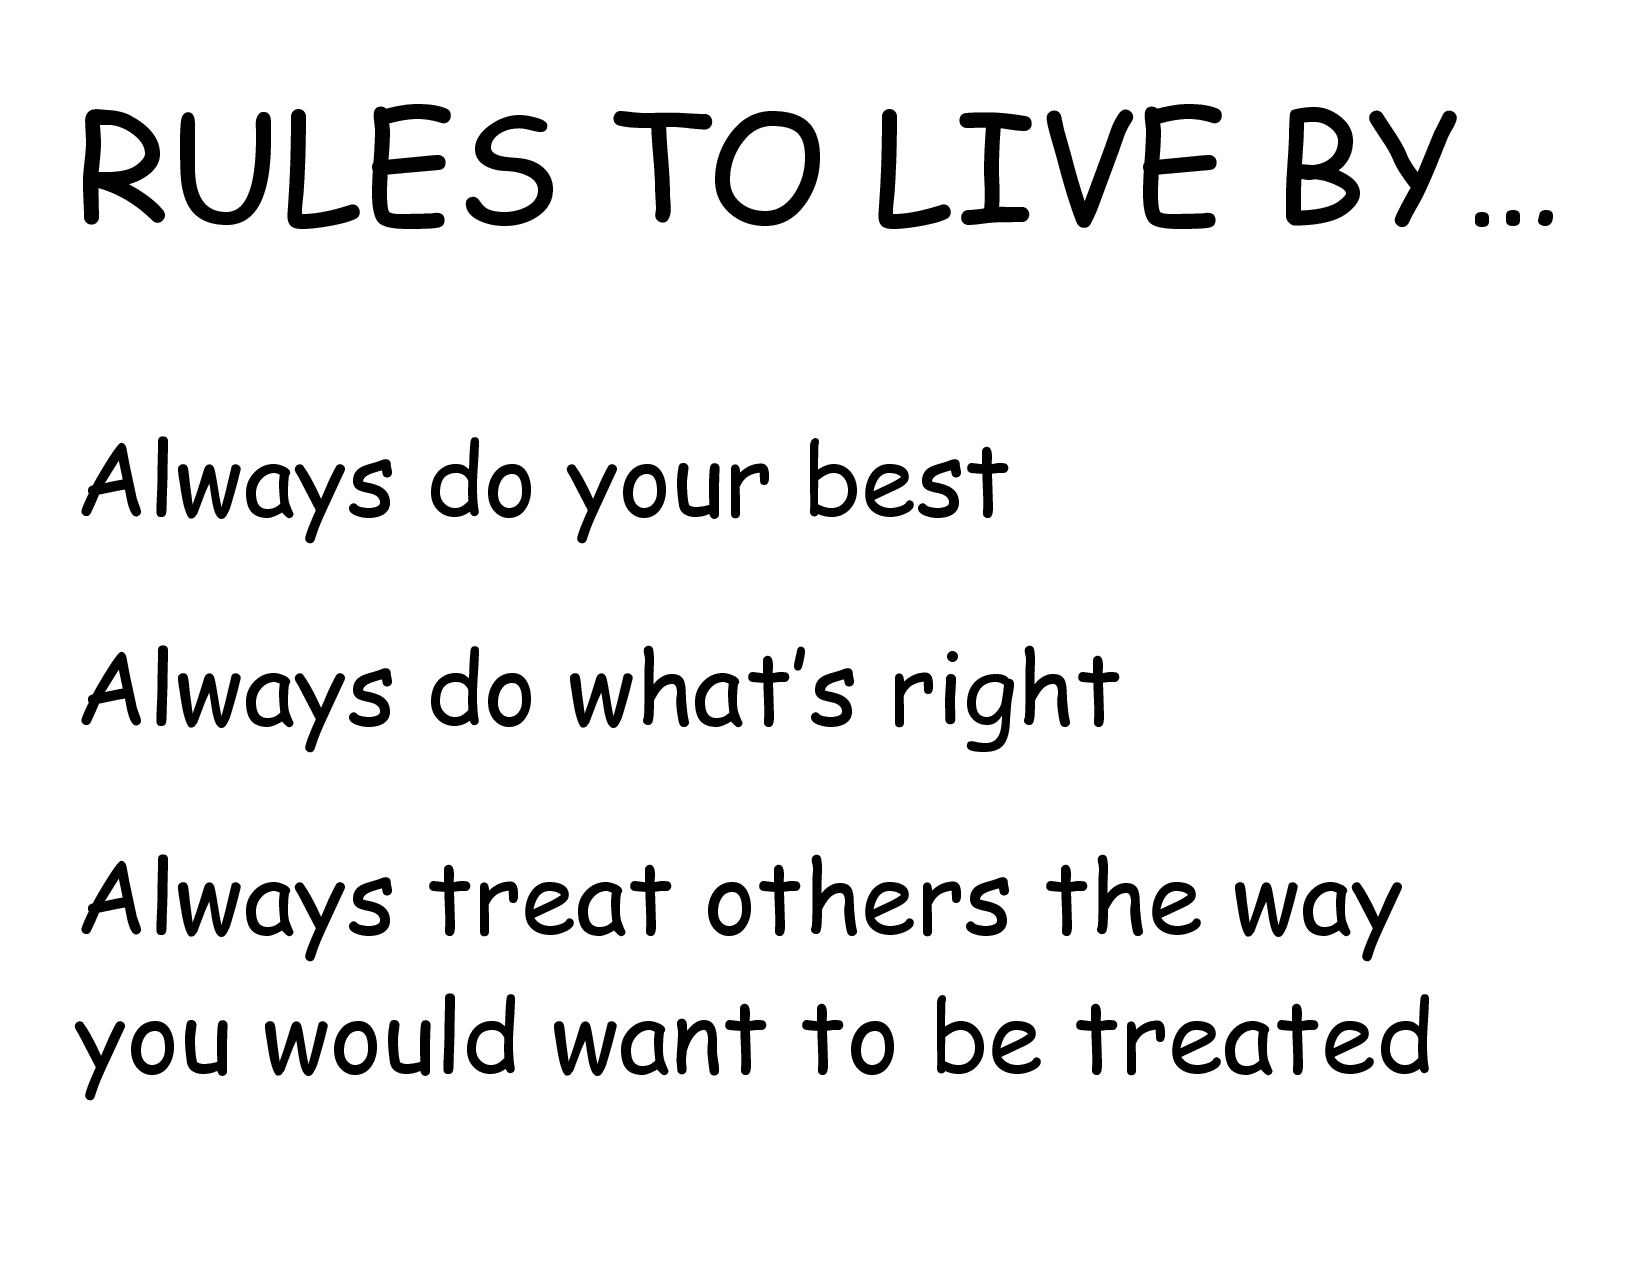 Motivational Wallpaper on Rules : Rules to Live by... - Dont Give Up World